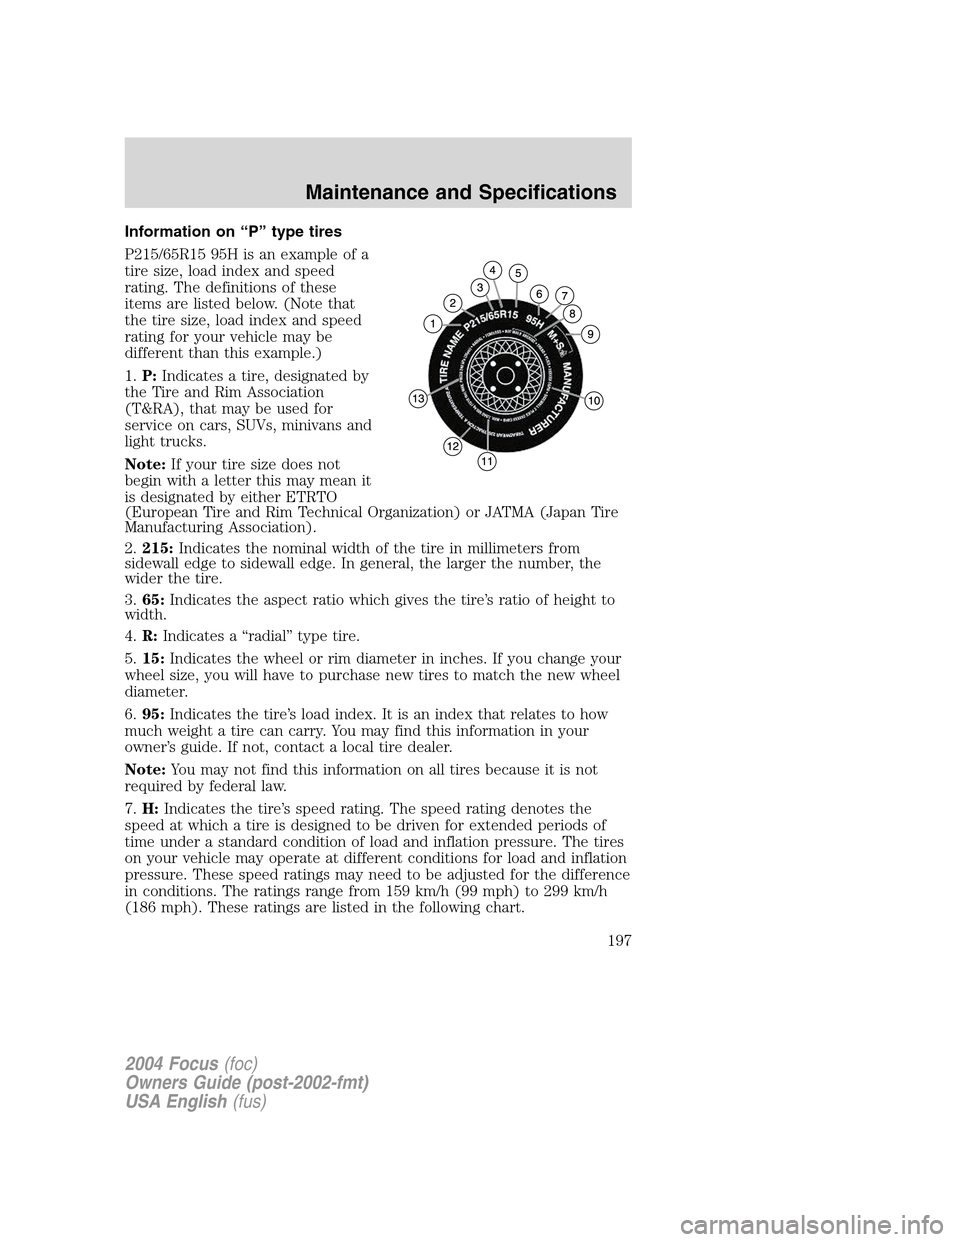 FORD FOCUS 2004 1.G Owners Manual Information on“P”type tires
P215/65R15 95H is an example of a
tire size, load index and speed
rating. The definitions of these
items are listed below. (Note that
the tire size, load index and spee